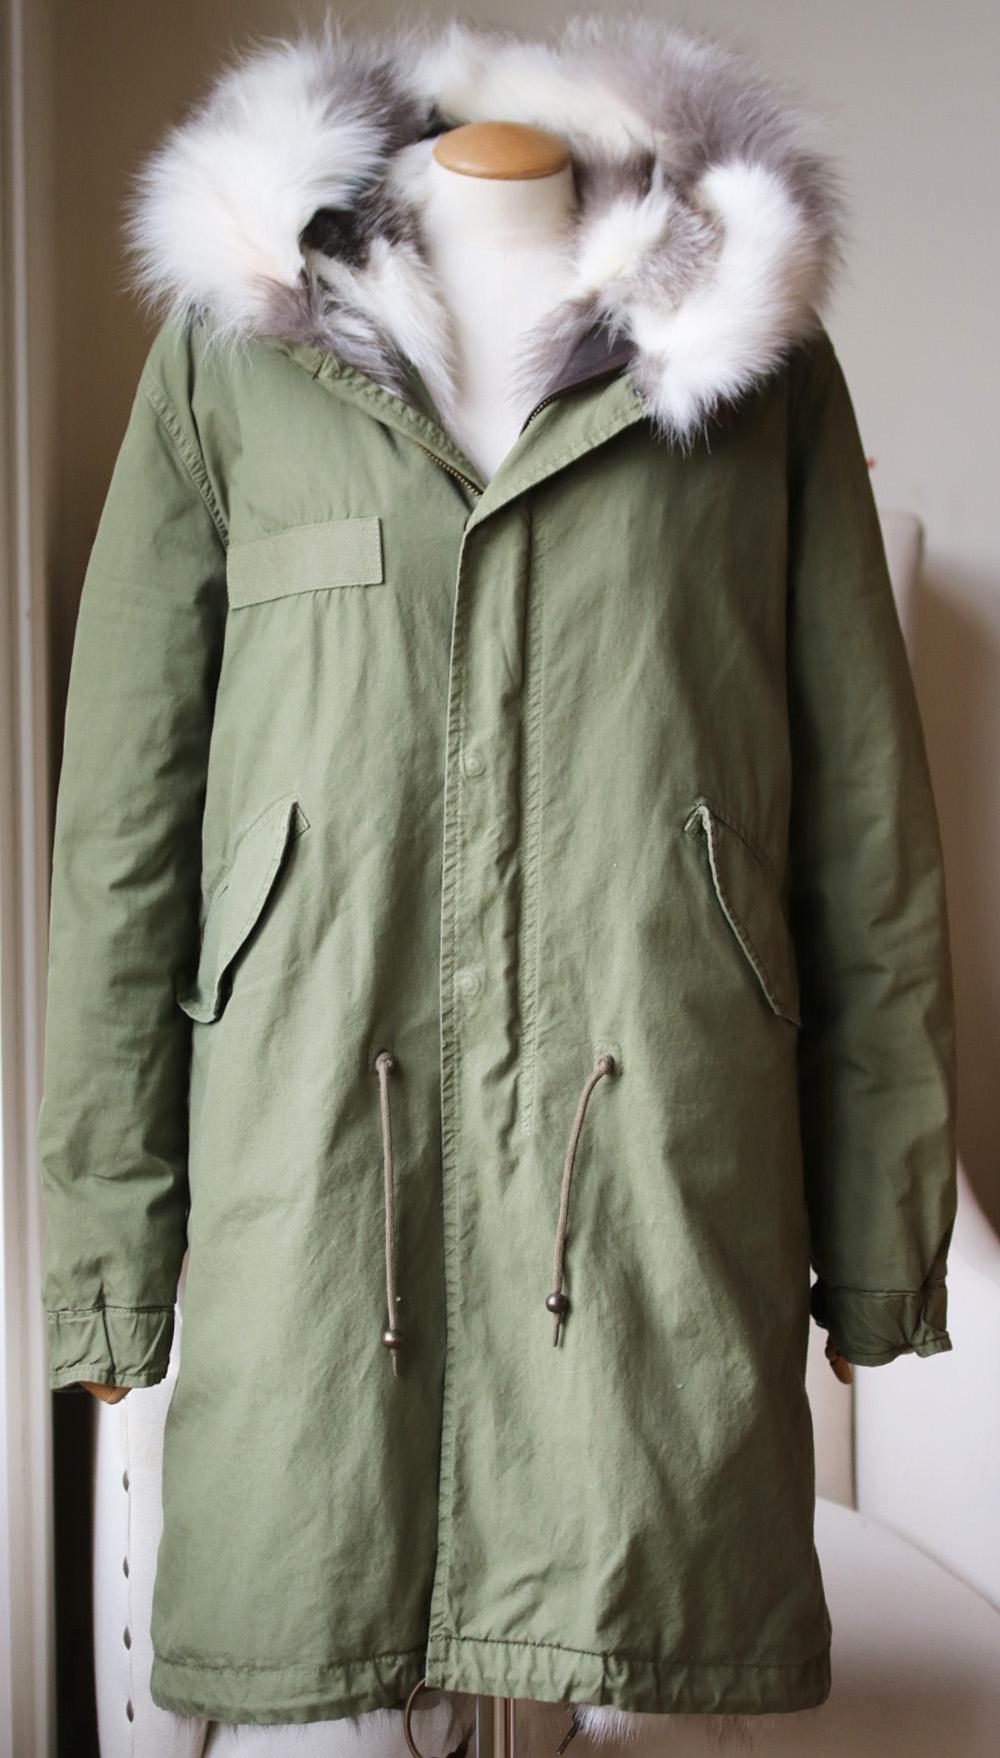 This version has been made by Italian artisans from hard-wearing cotton-canvas and lined in plush white and grey fox-fur. The zip is backed with leather so it won't pull the soft fibers. Army-green cotton-canvas, white and grey fox-fur.  Concealed